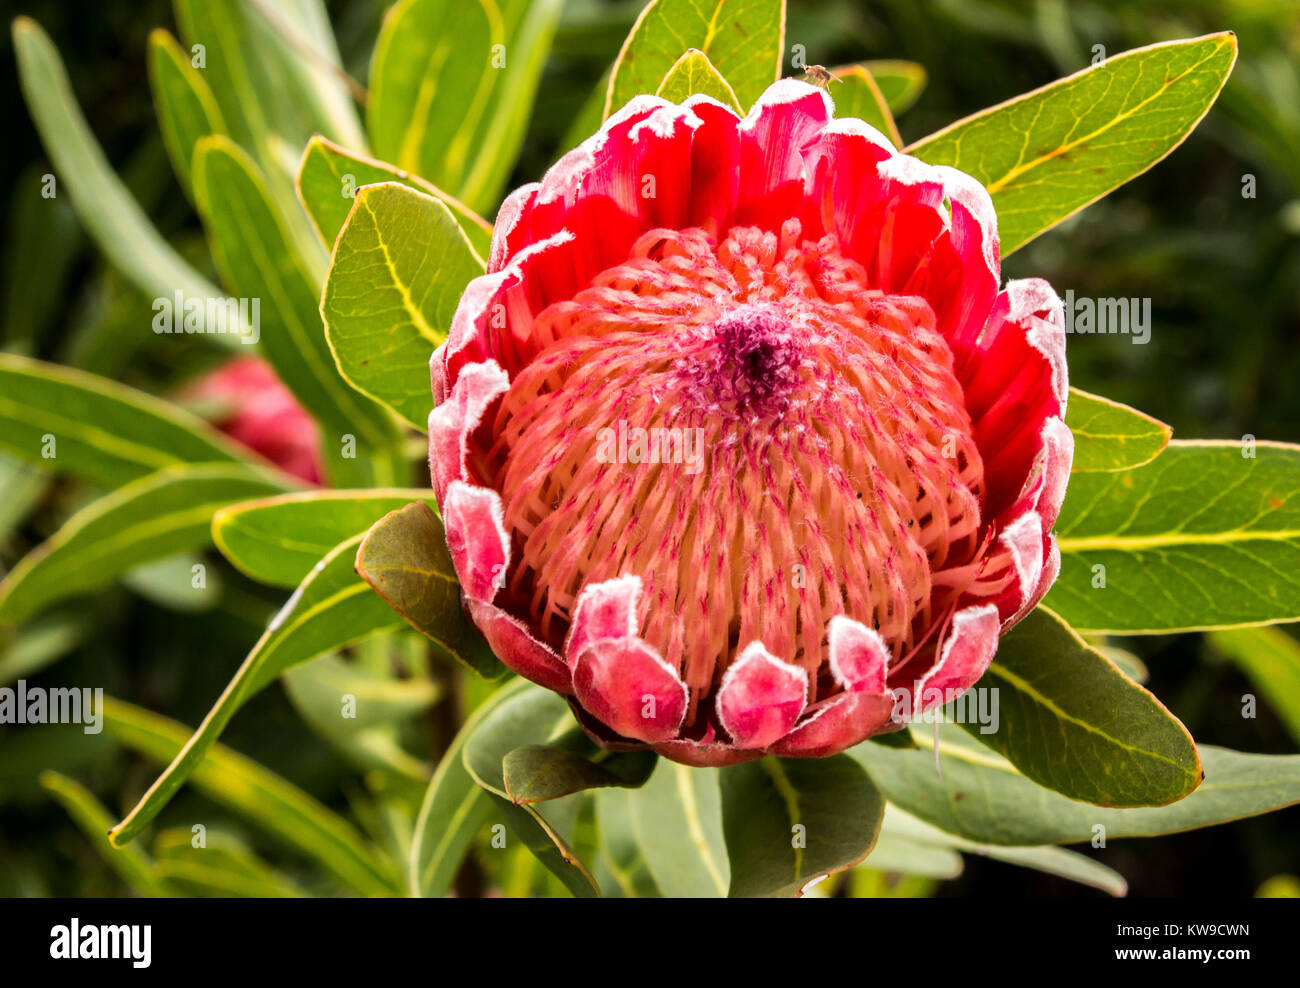 Red large tropical Protea sugarbush flower blossom against green leaves Stock Photo